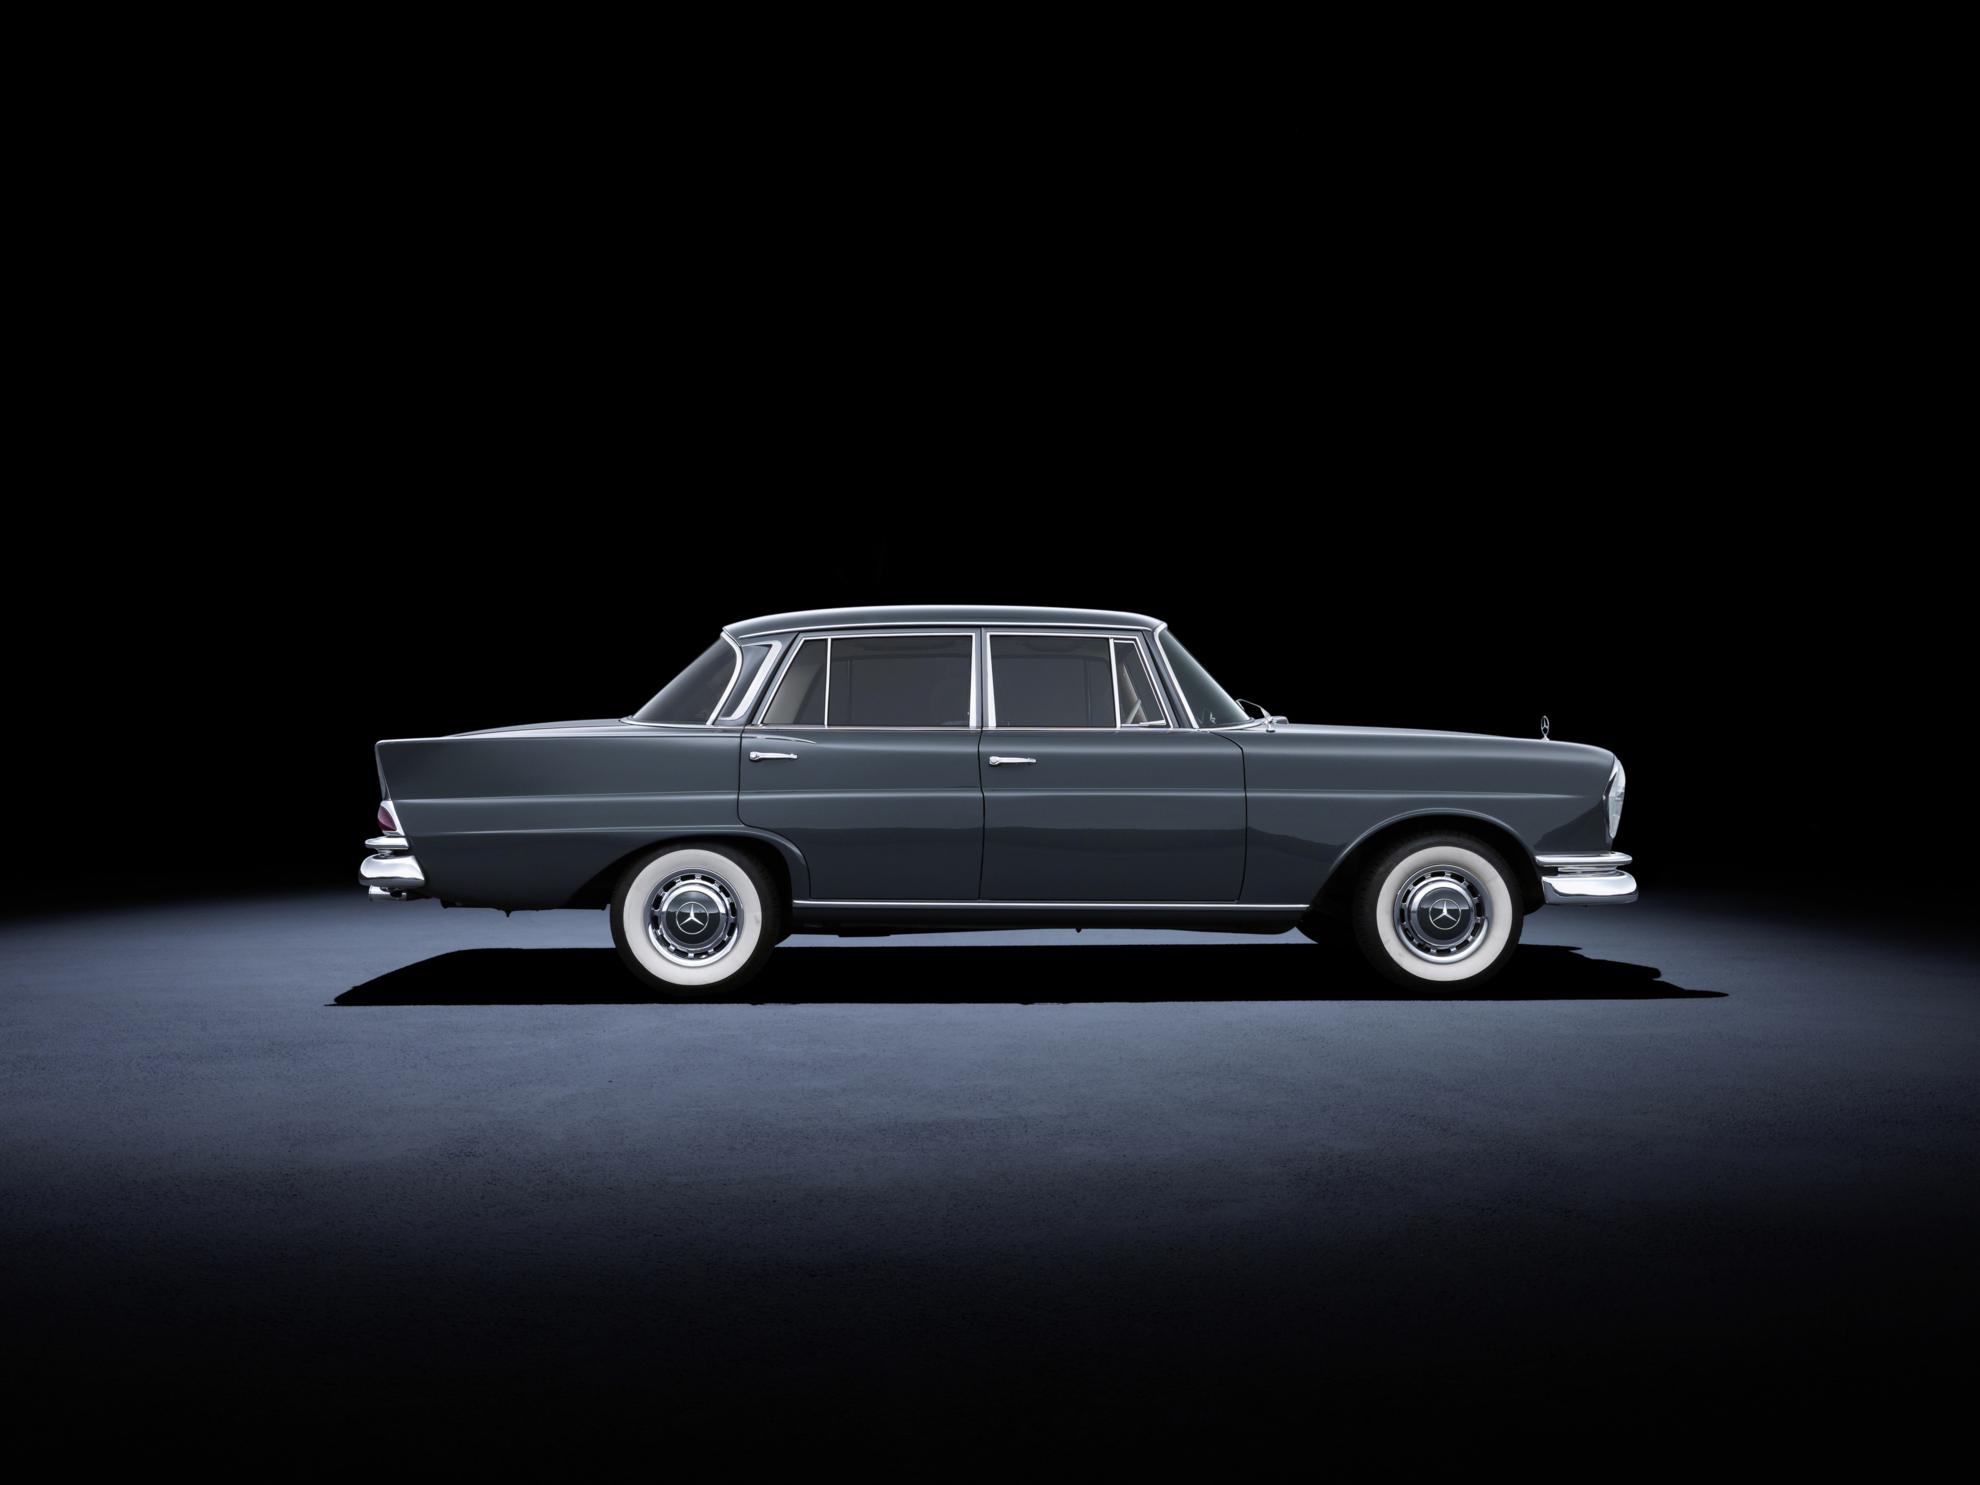 Mercedes Benz Heritage: The highlights of the S-Class and its predecessors